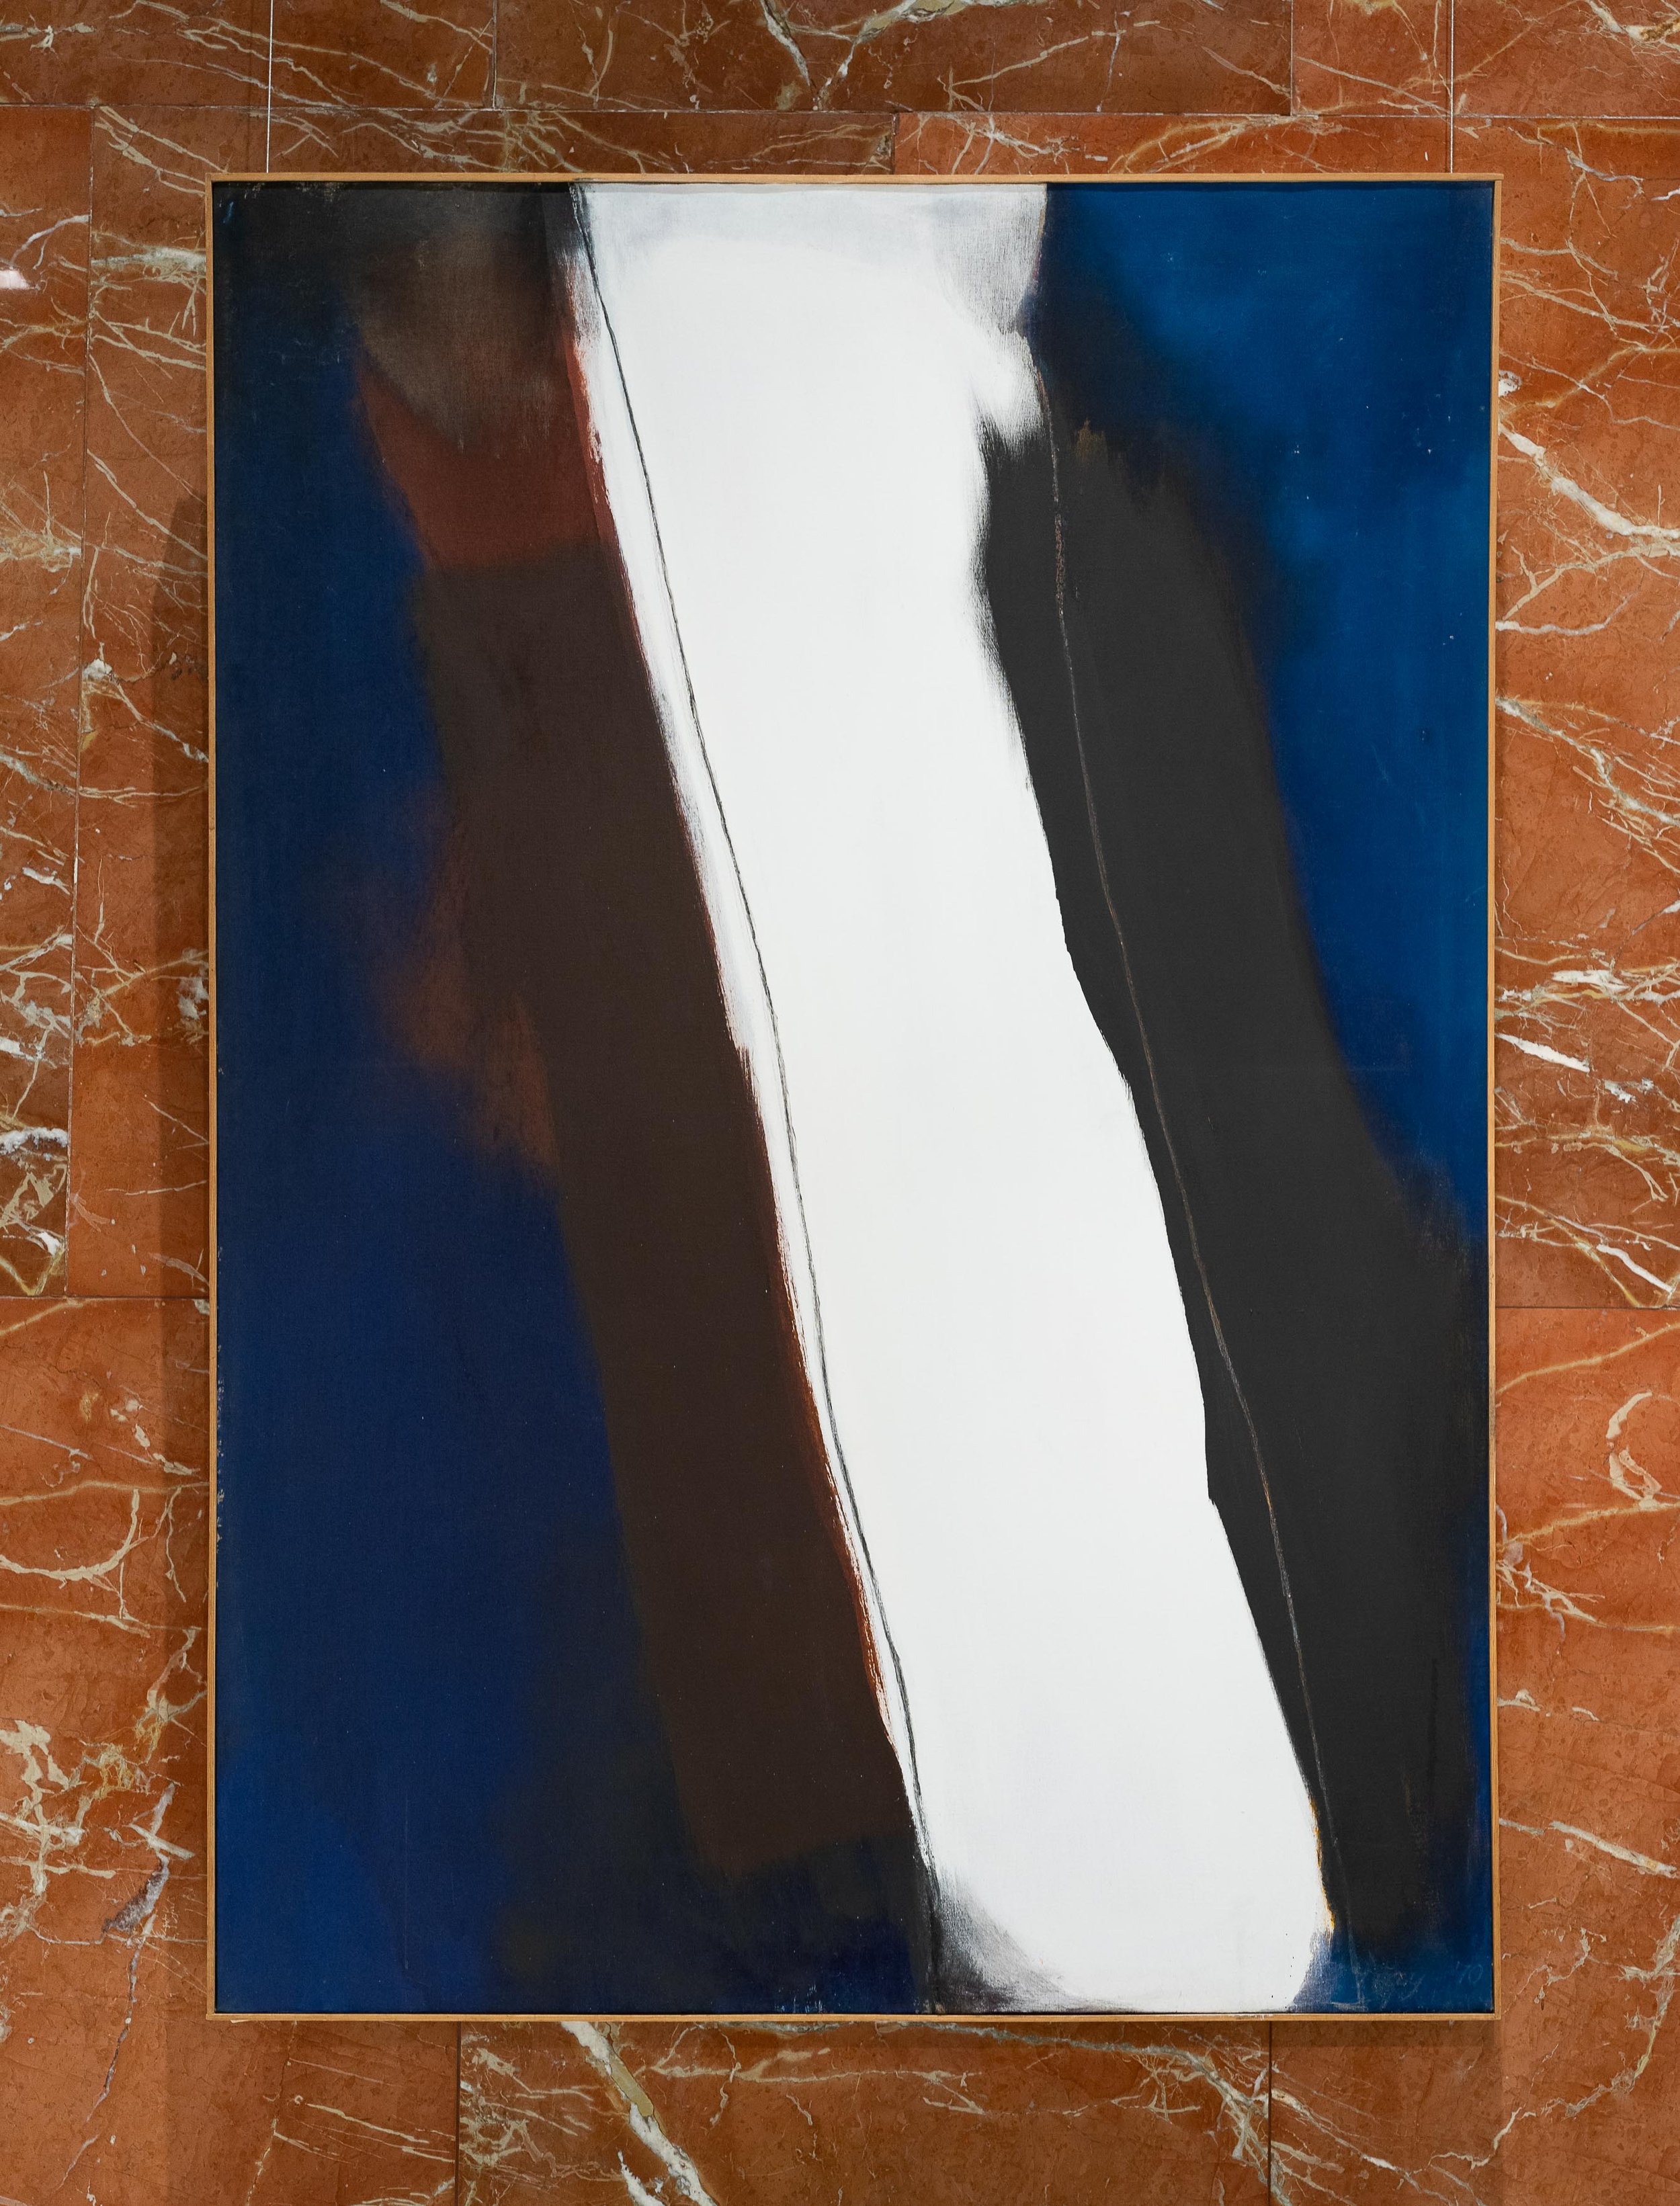  Cleve Gray,  Hina II,  1971, acrylic on canvas, 68h x 47.50w in 